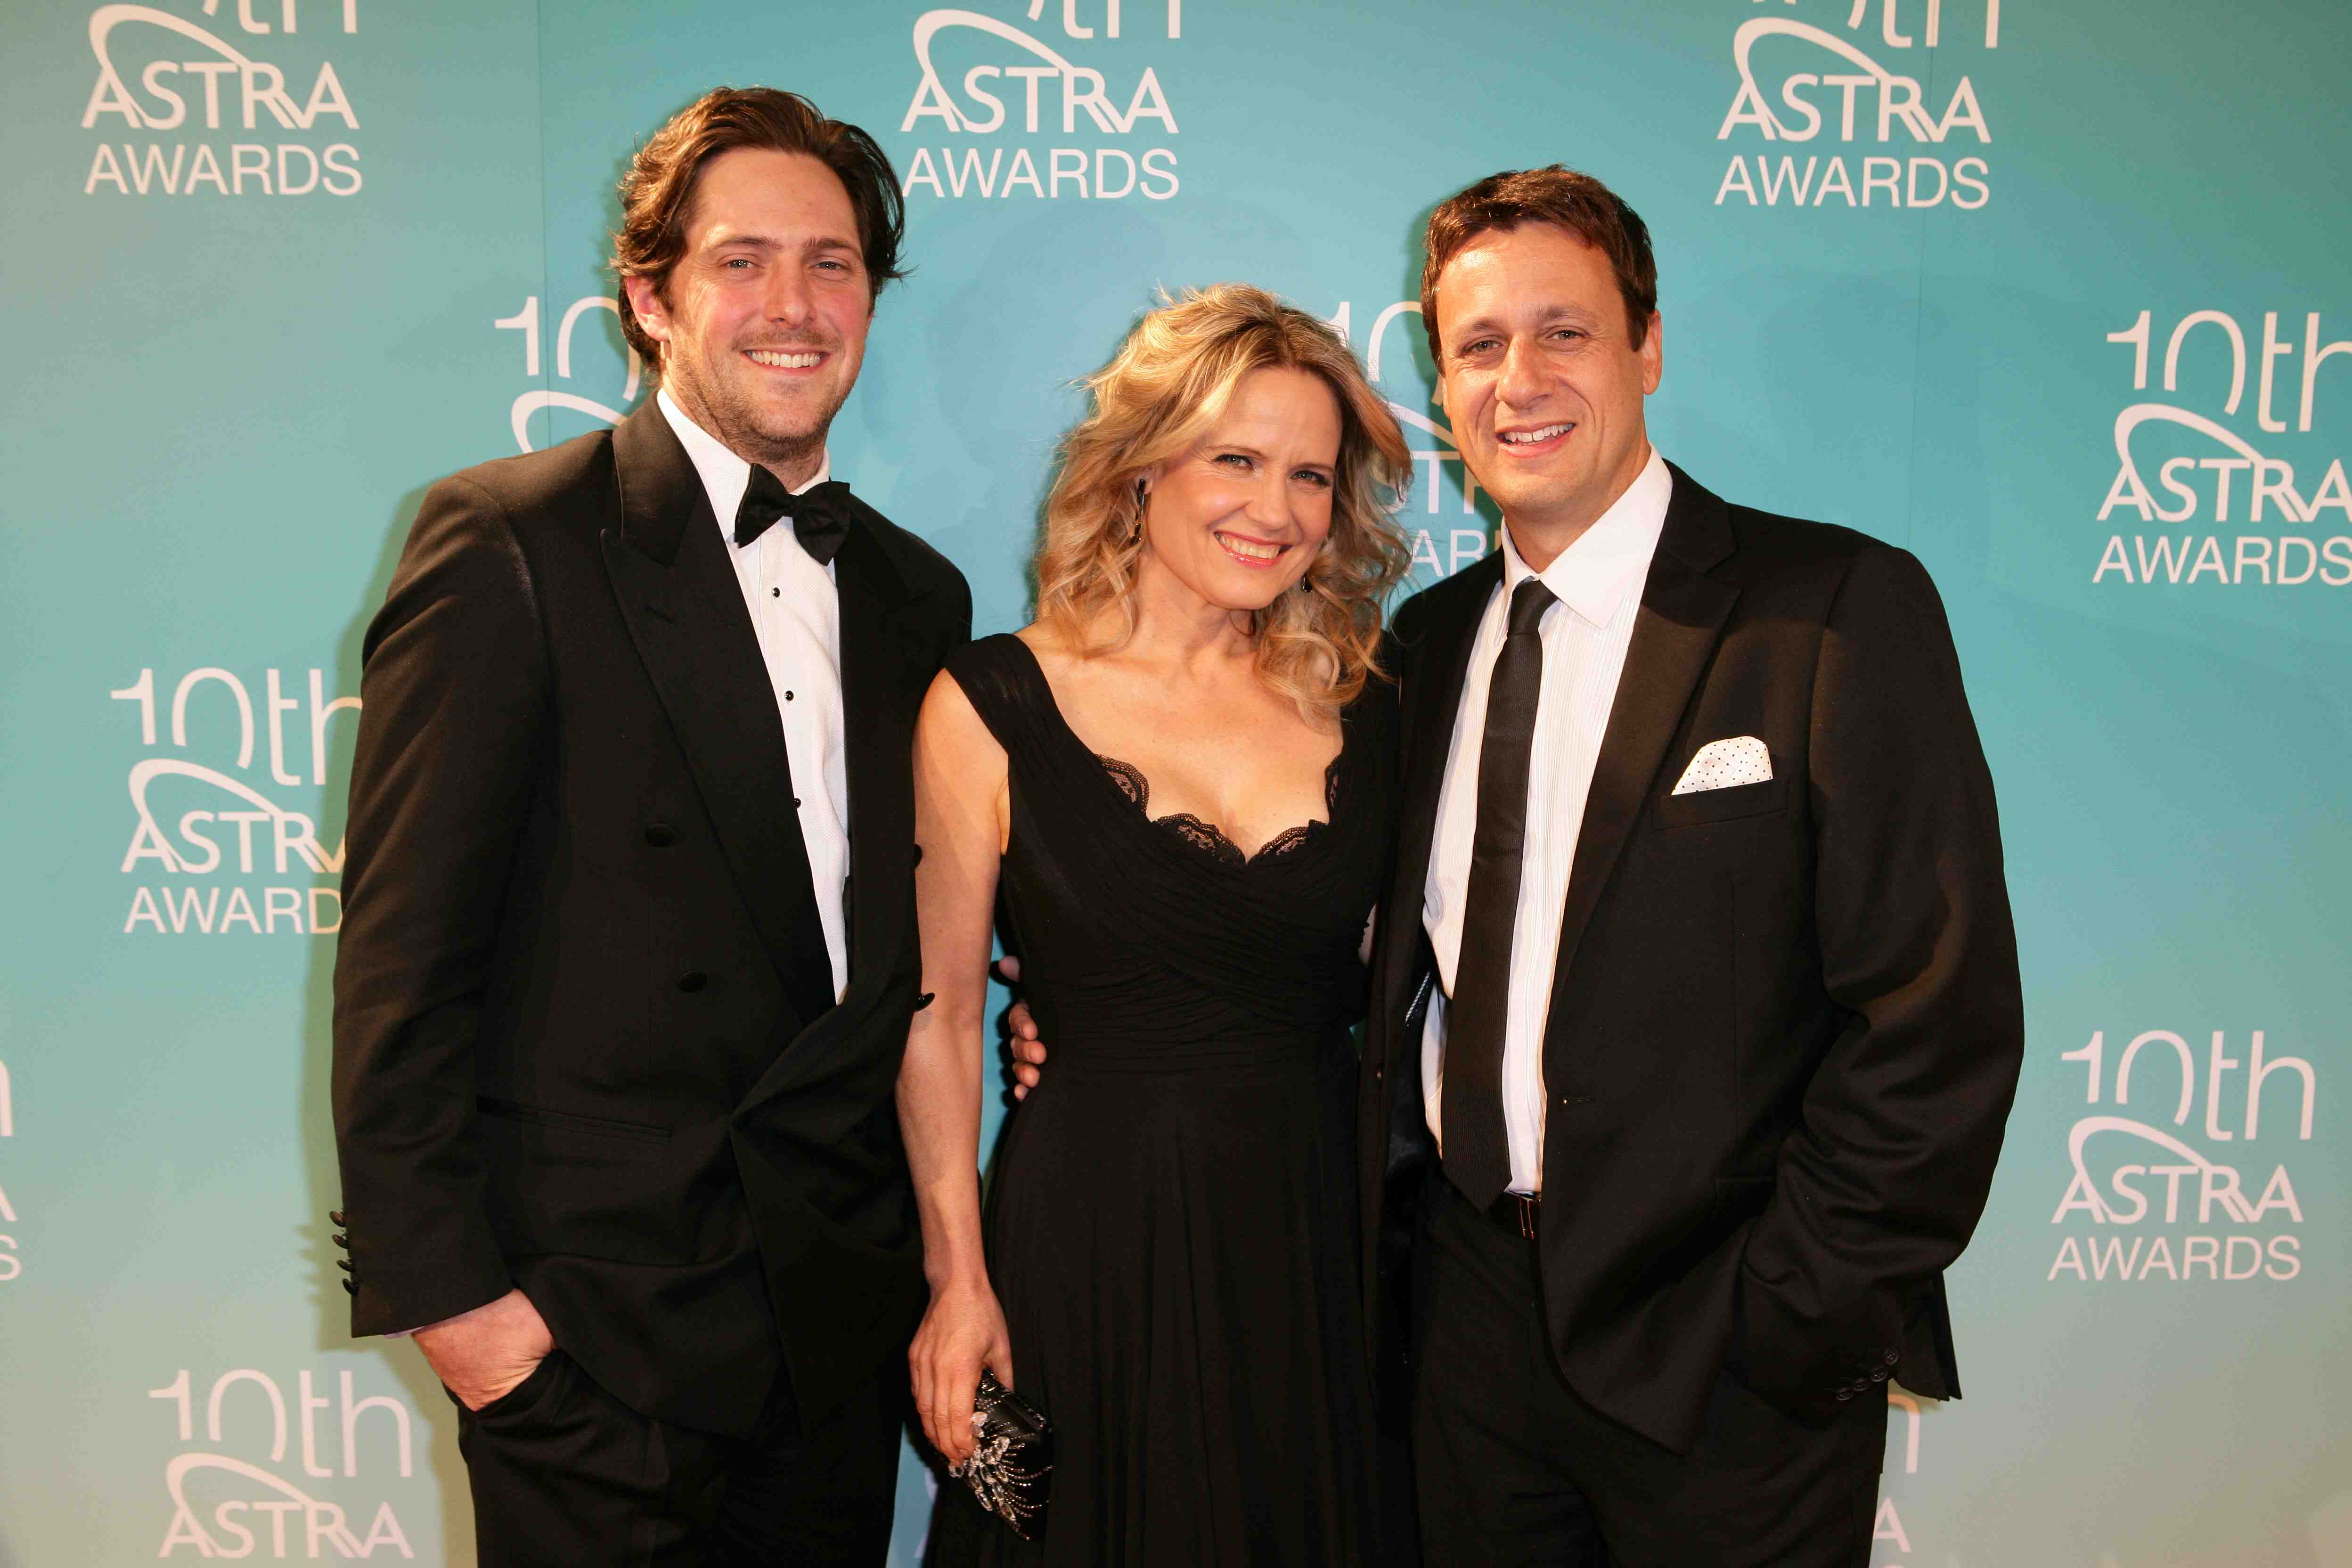 Charlie Albone, Shaynna Blaze and Andrew Winter (The LifeStyle Channel)